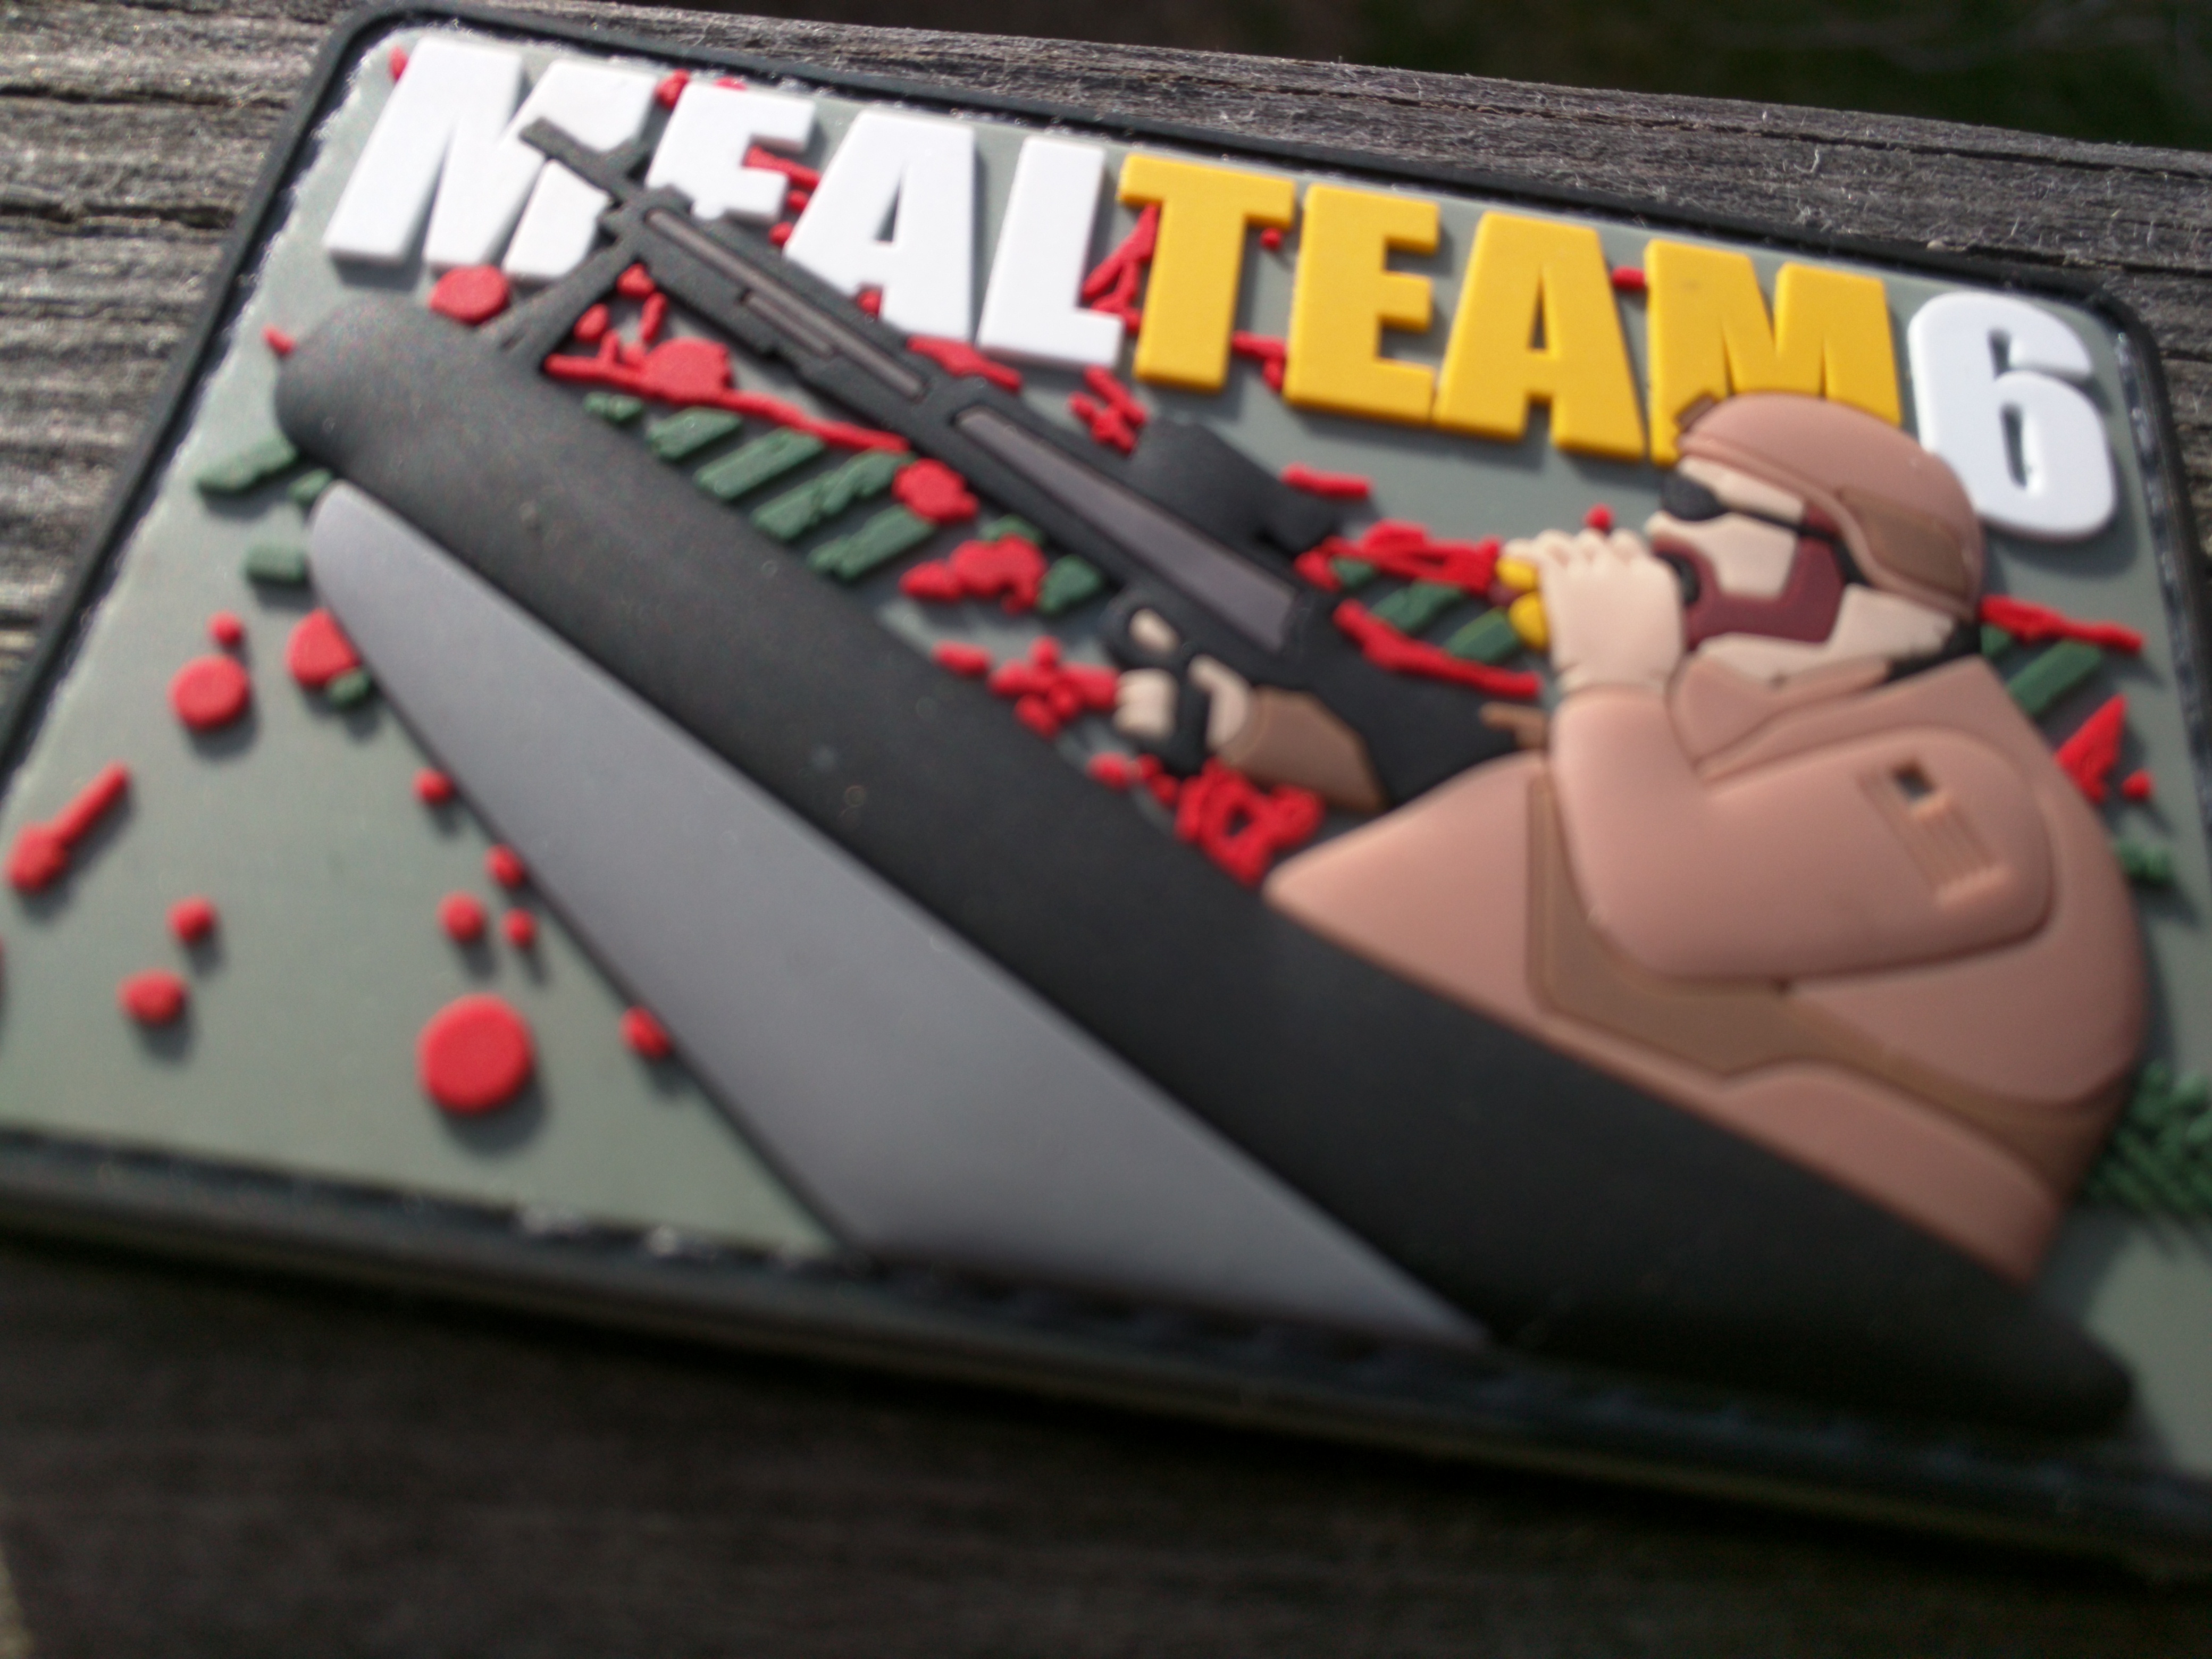 MEAL TEAM 6 PVC Morale Patch Limited Availability.